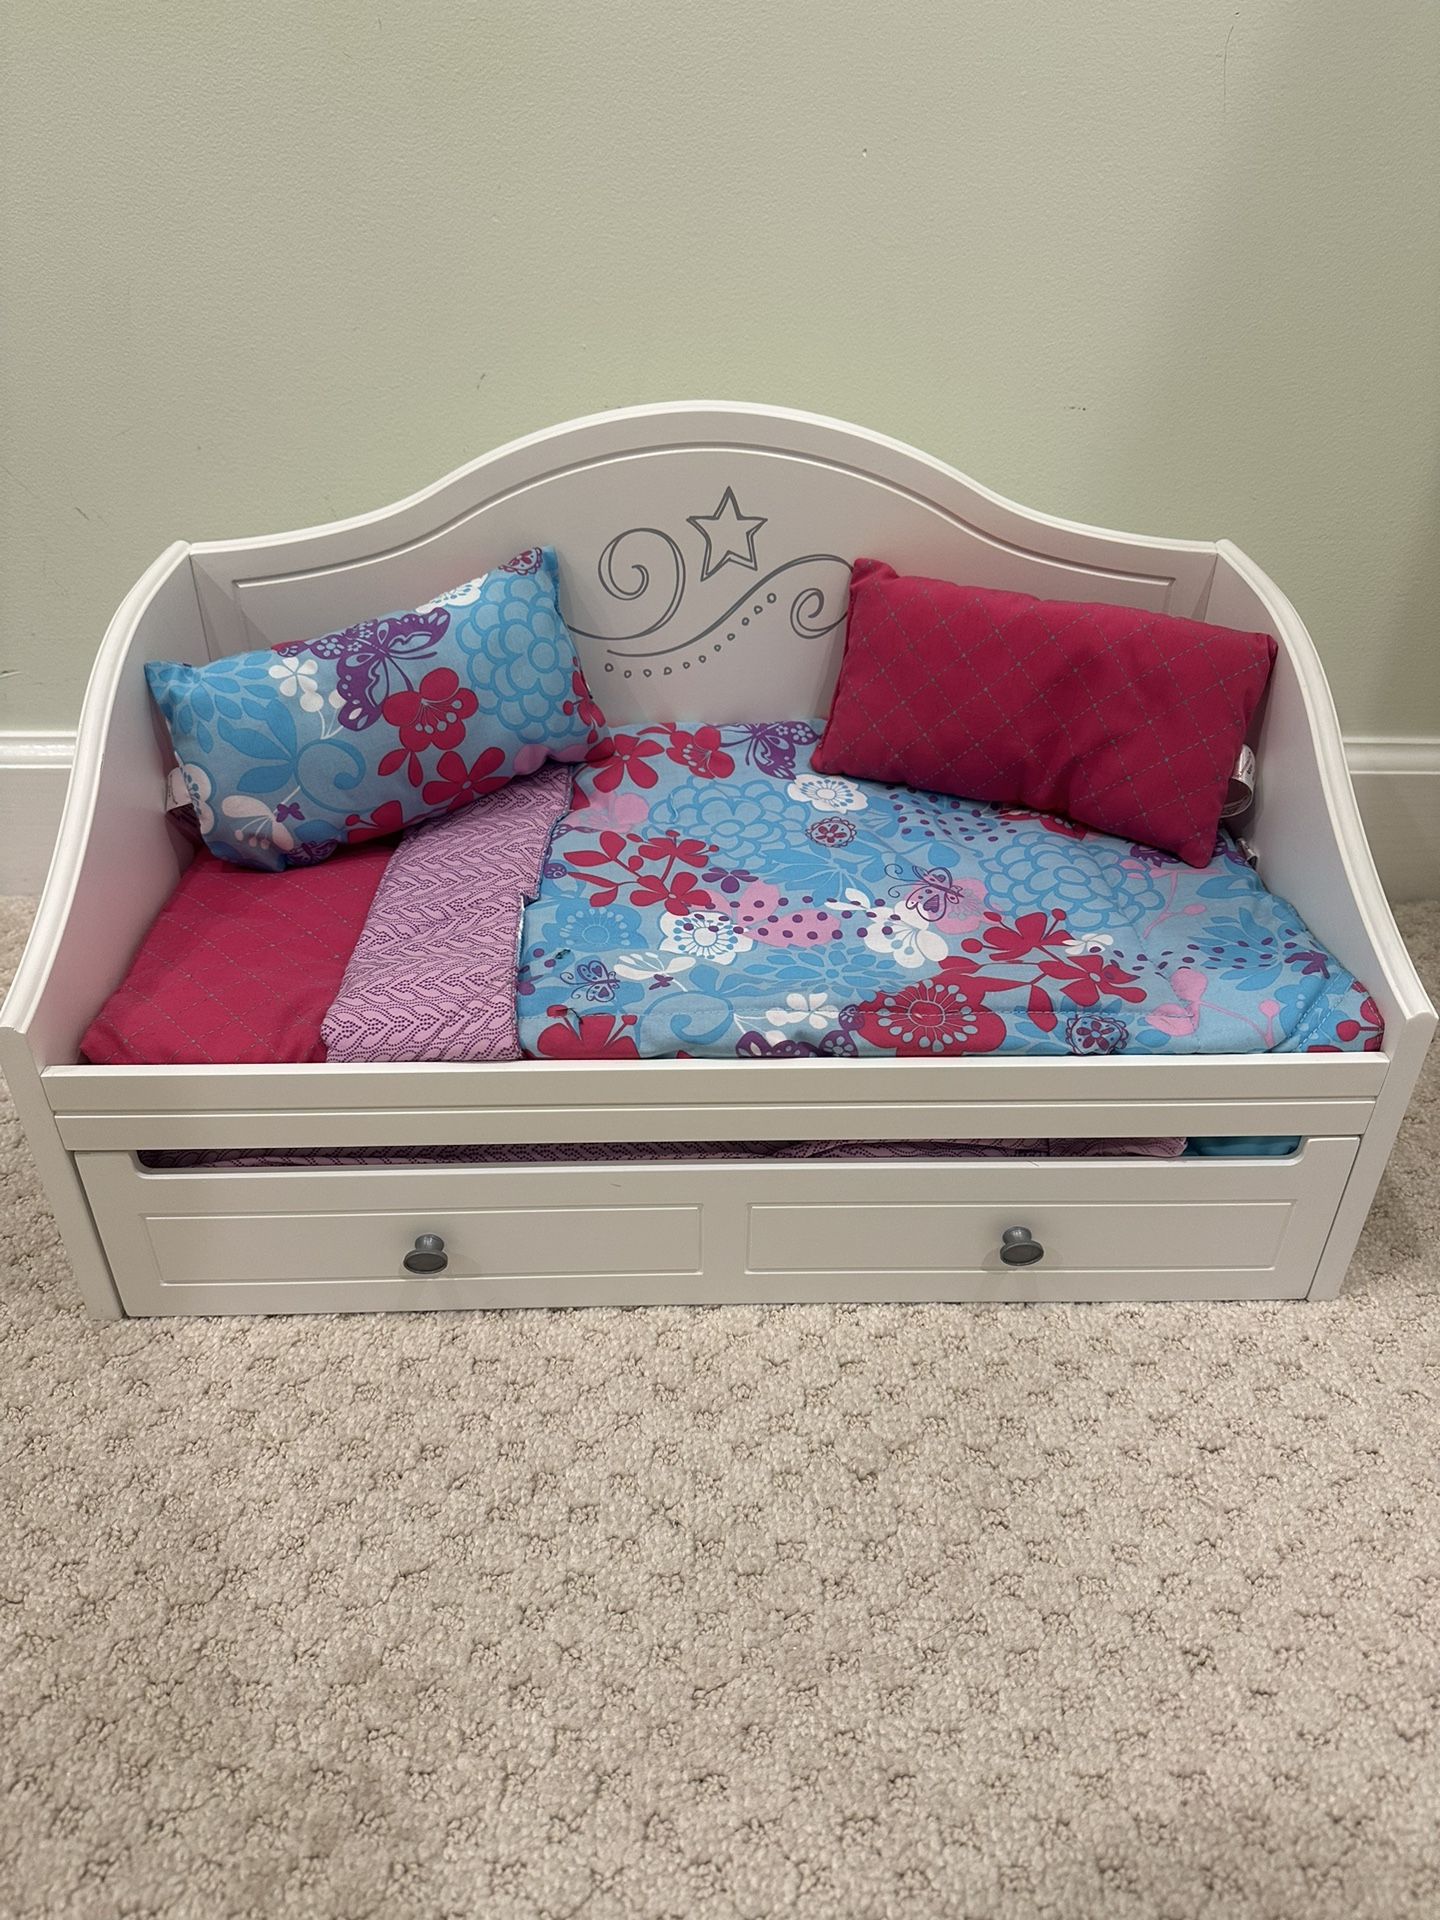 American Girl Doll Day Bed - Brand New